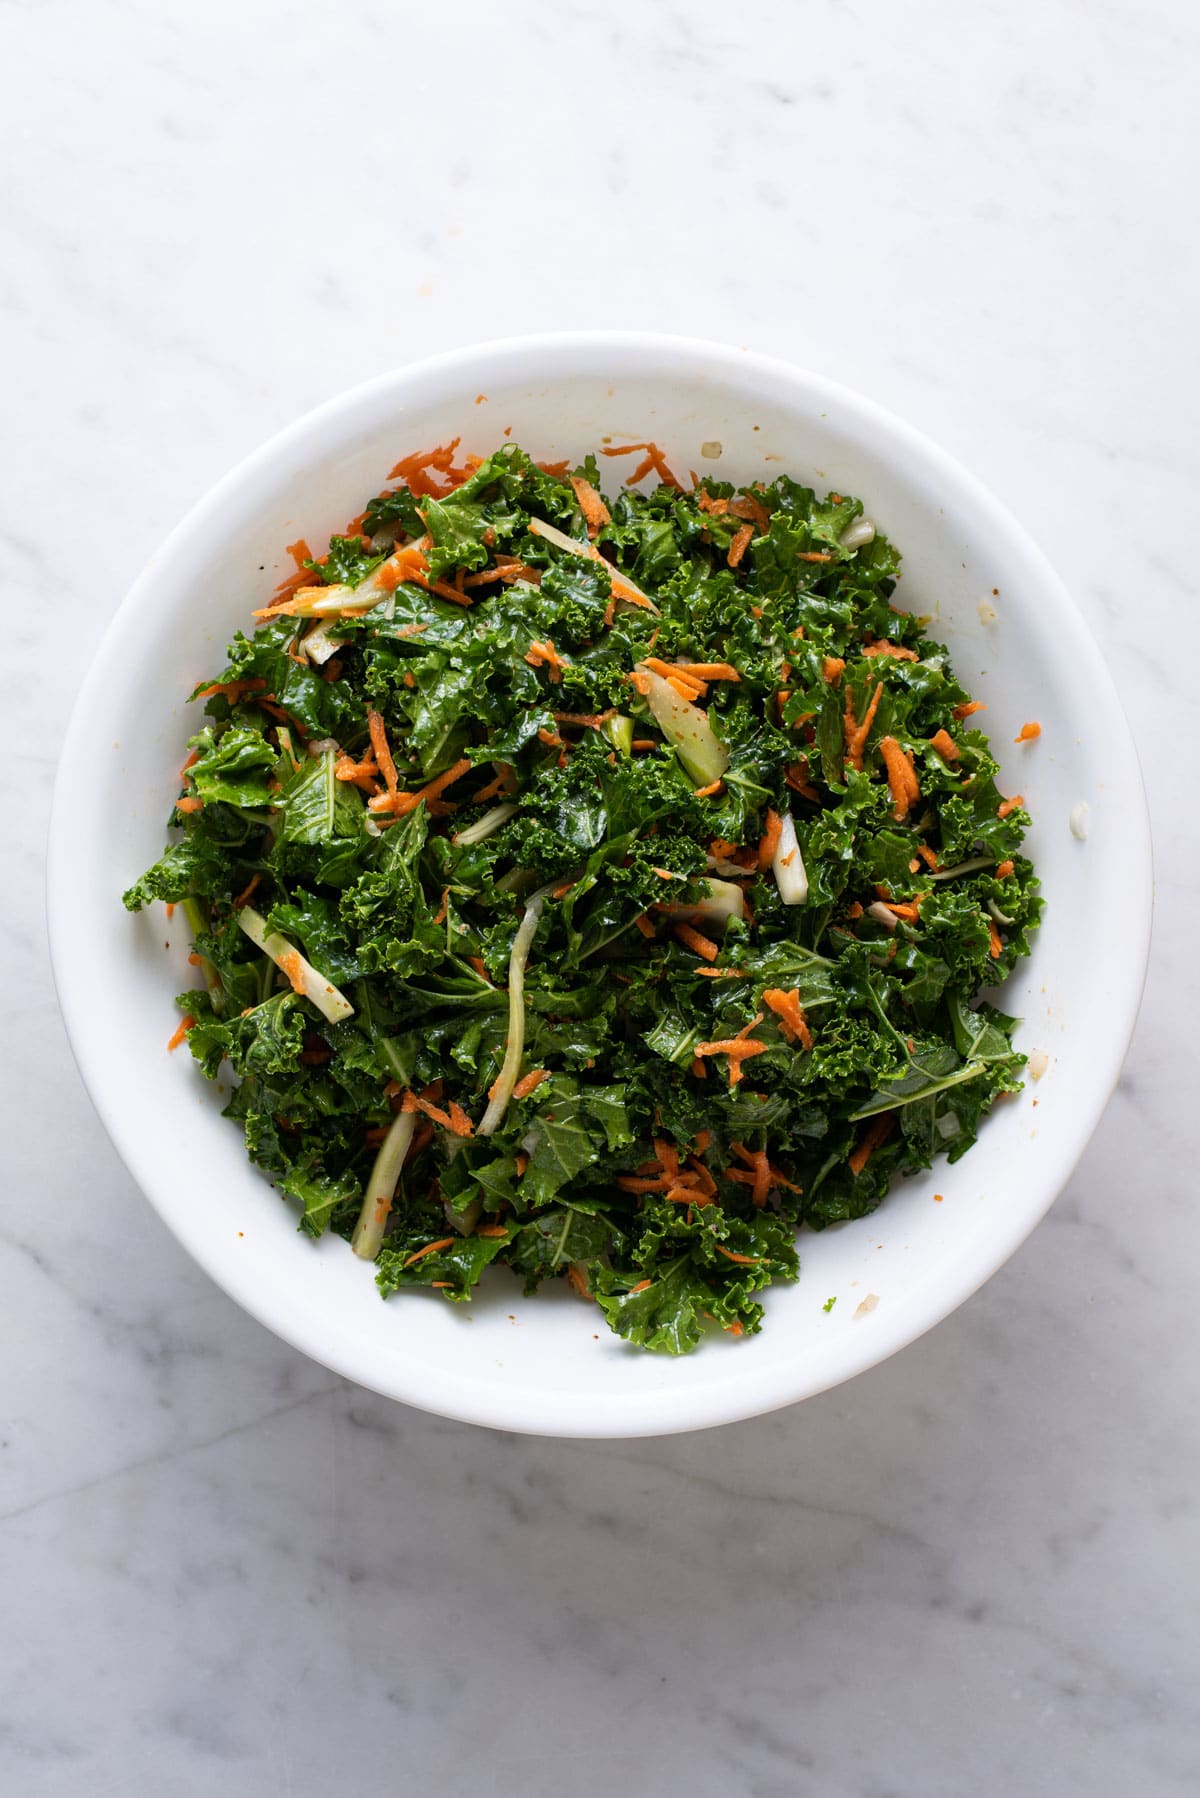 Massaged kale and fennel in a bowl.